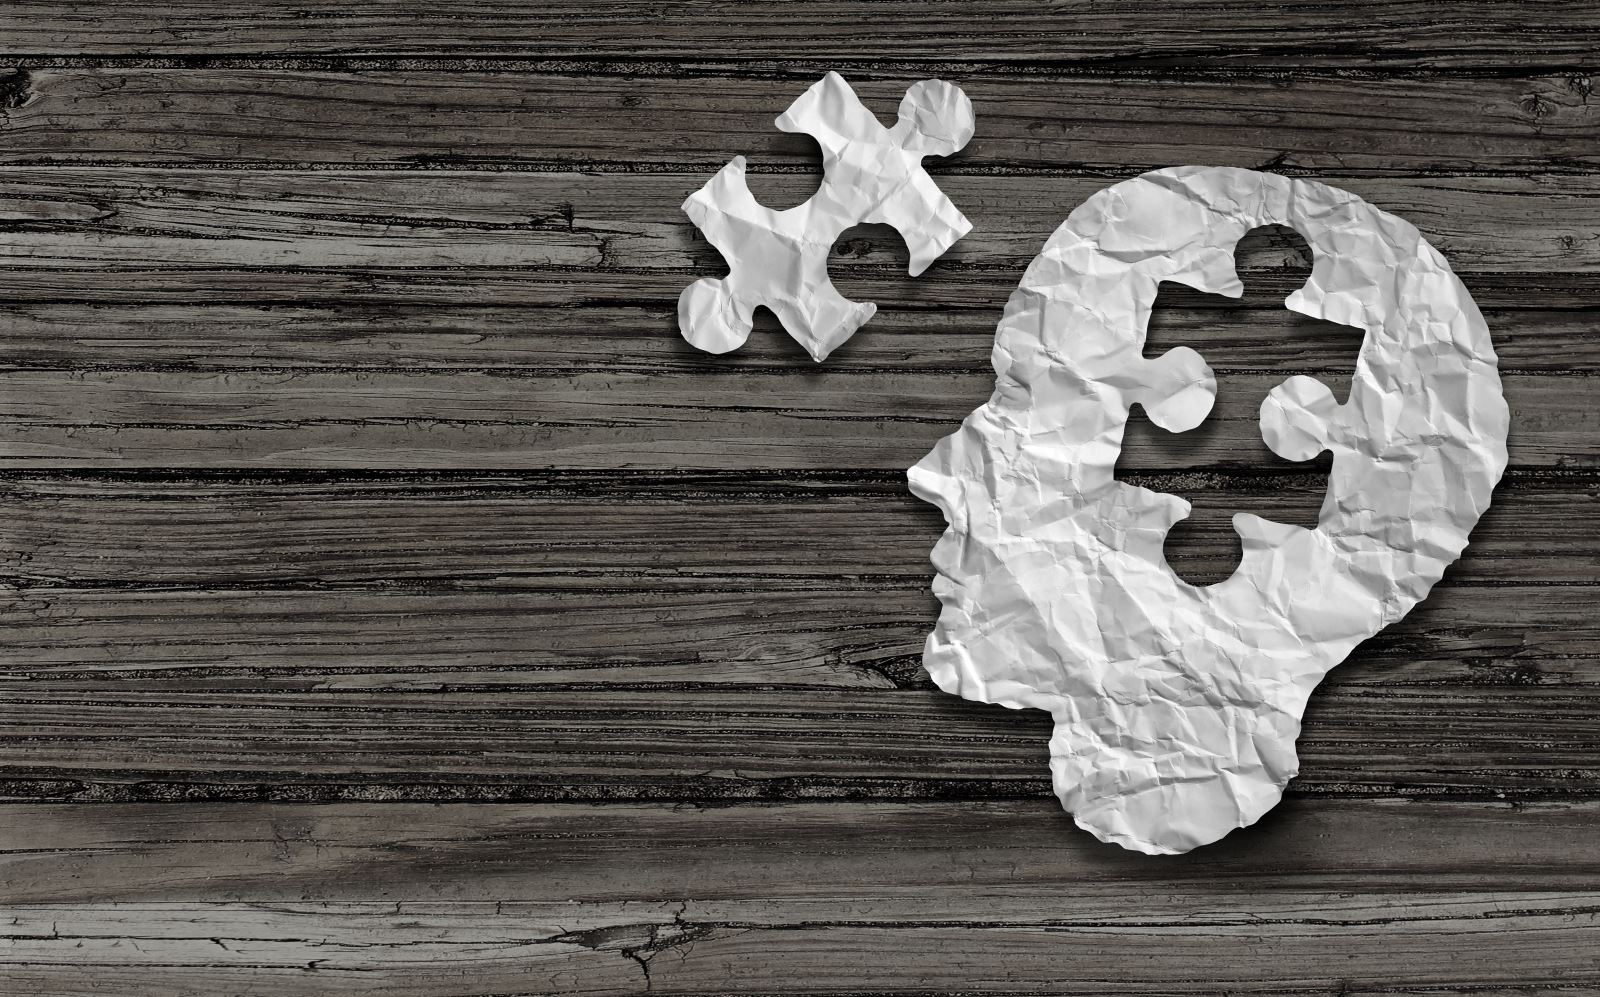 image of a puzzle piece next to a cutout of the profile of a non-gendered human head with the same puzzle piece missing